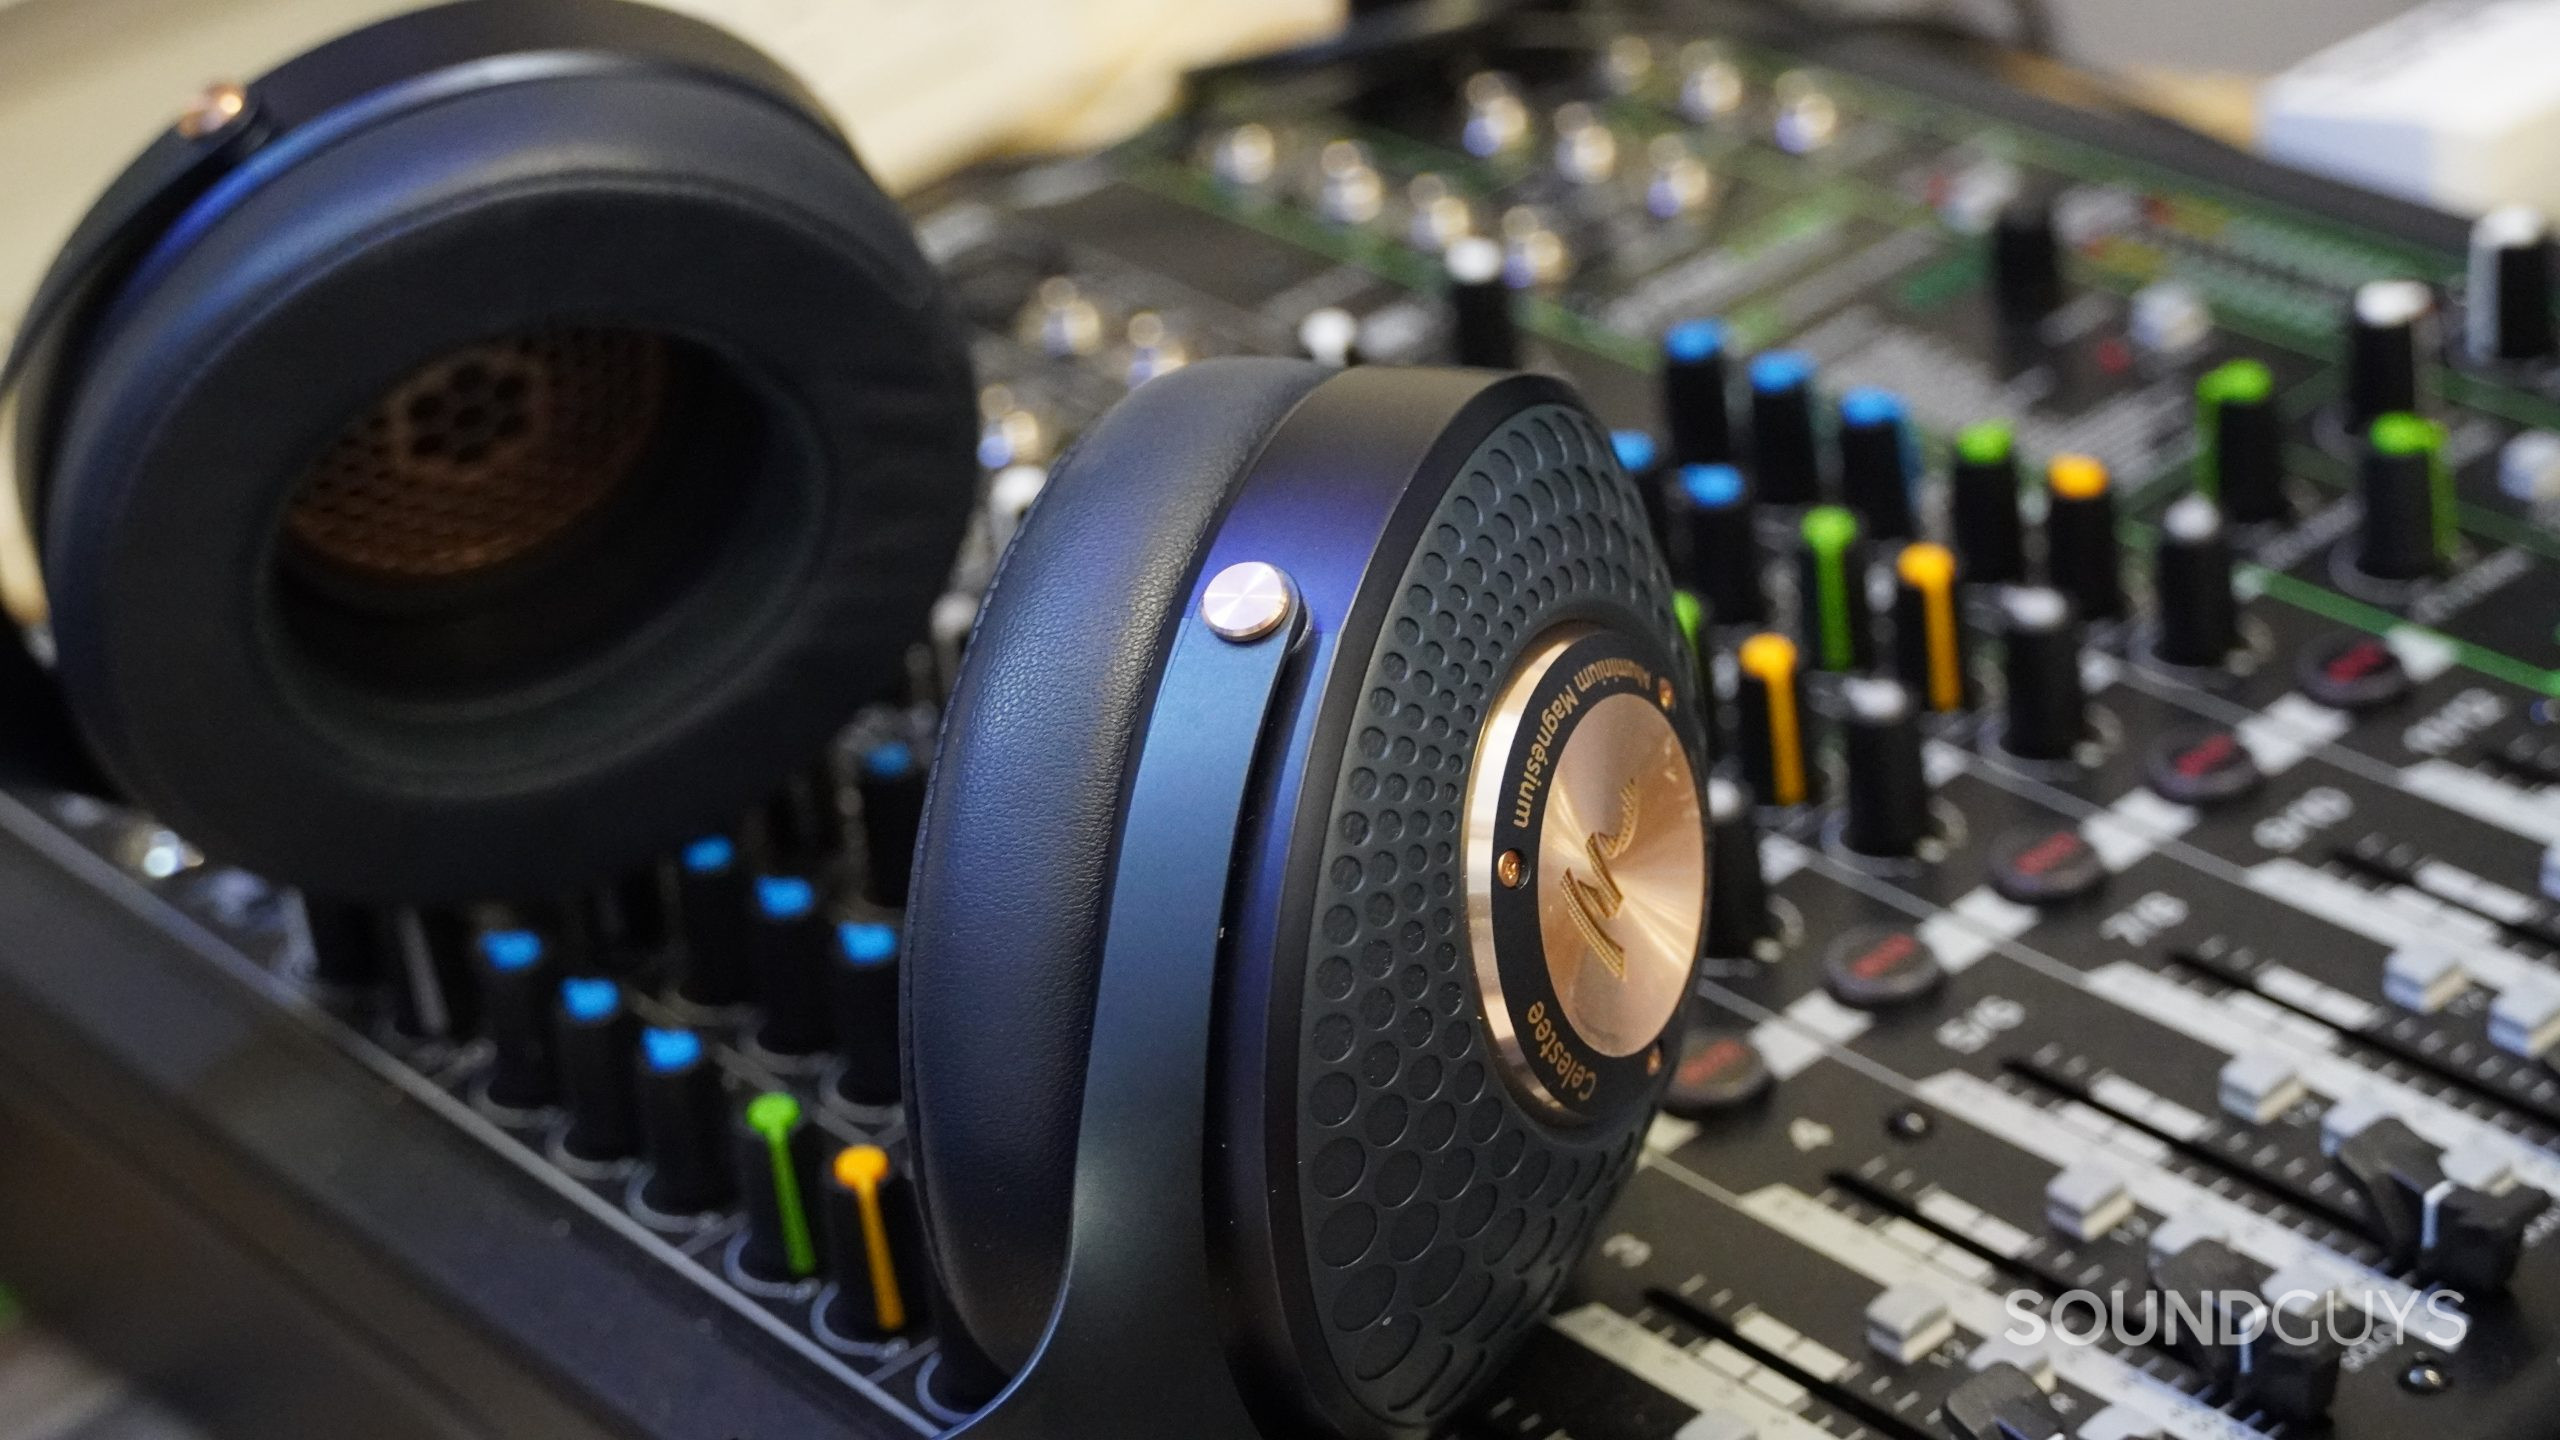 The Focal Celestee headphones resting on top of a mixer.